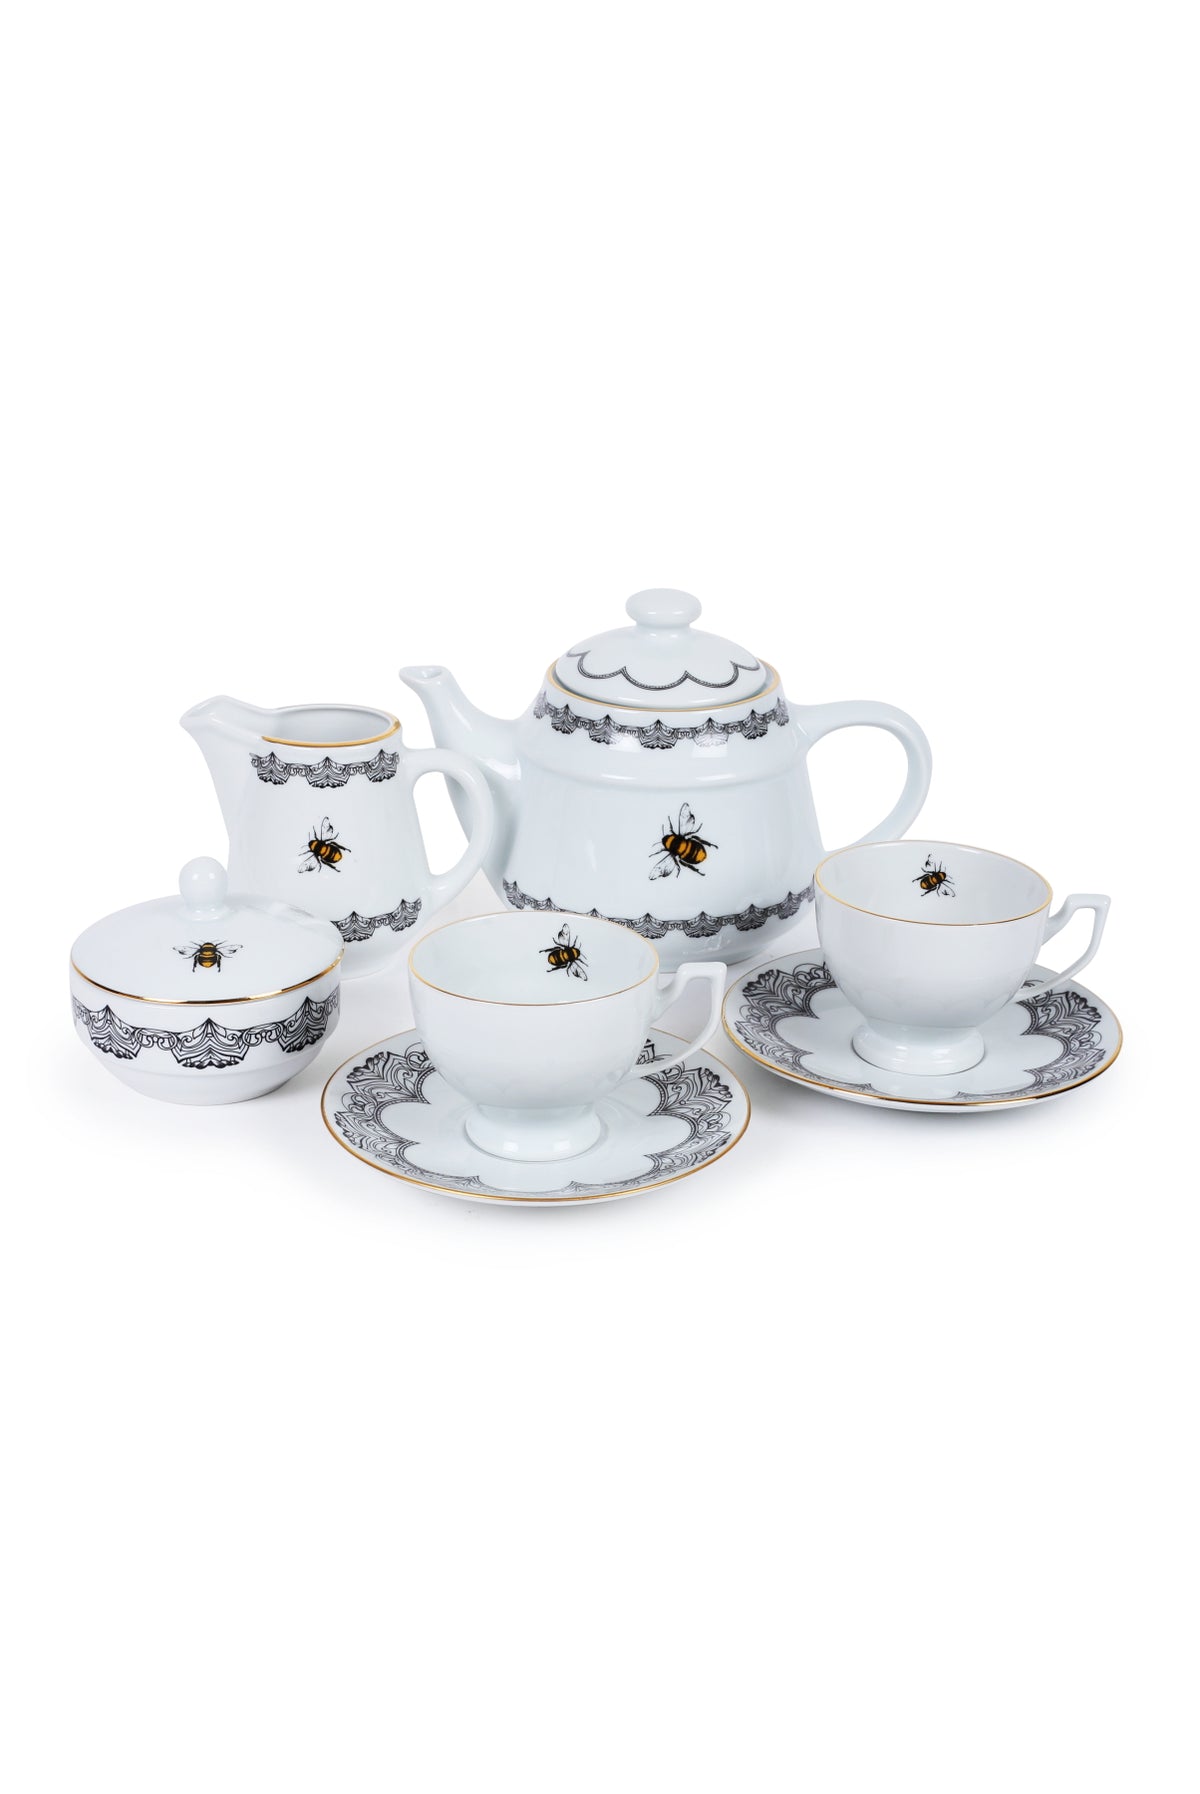 Bee Happy Collection-Tea Set of 5 Pieces